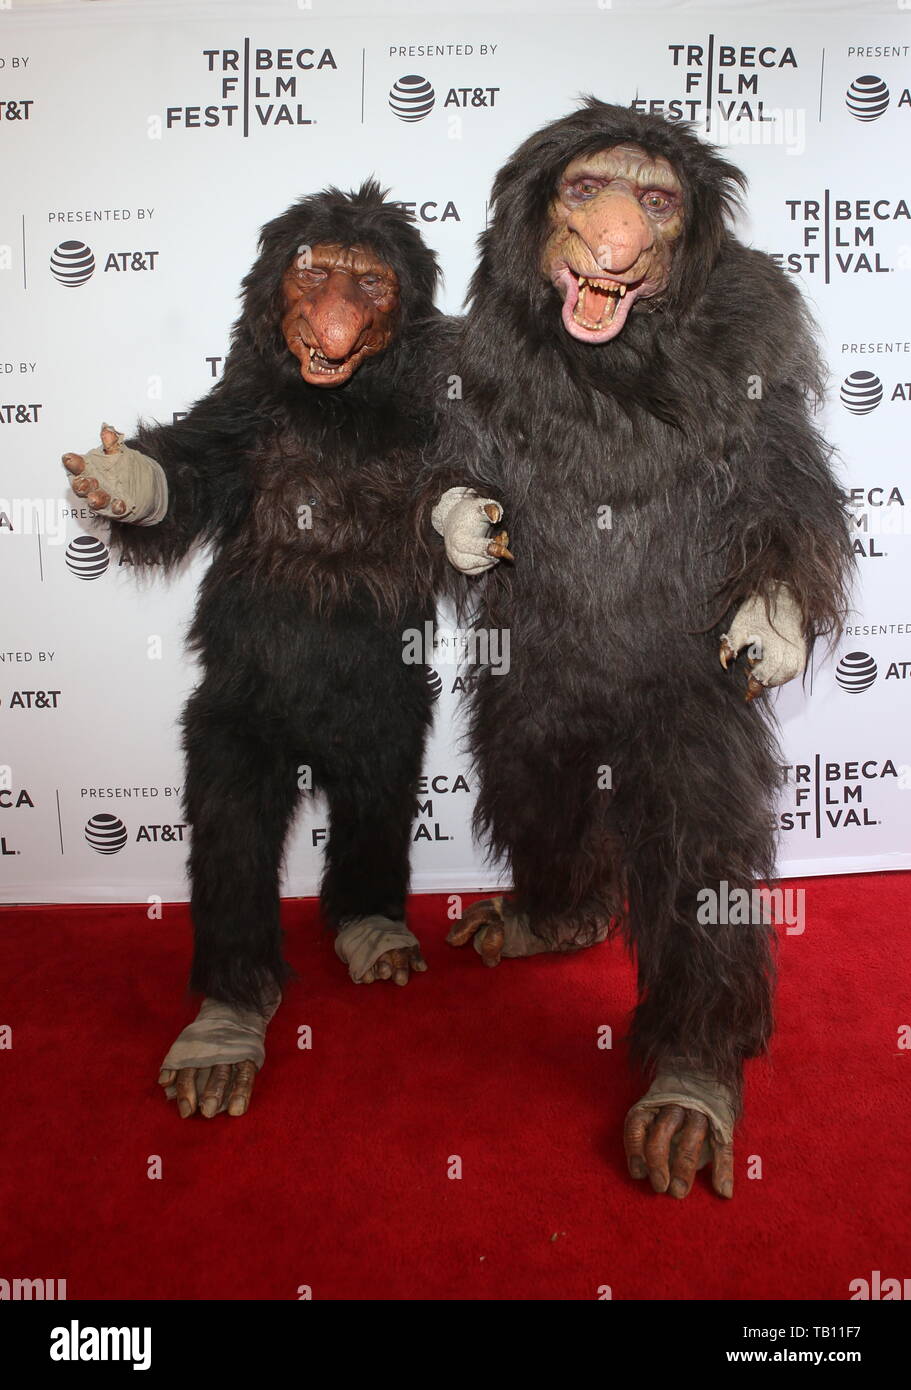 2019 Tribeca Film Festival - The Place of No Words - Premiere  Featuring: Grumblers Where: New York City, New York, United States When: 27 Apr 2019 Credit: Derrick Salters/WENN.com Stock Photo